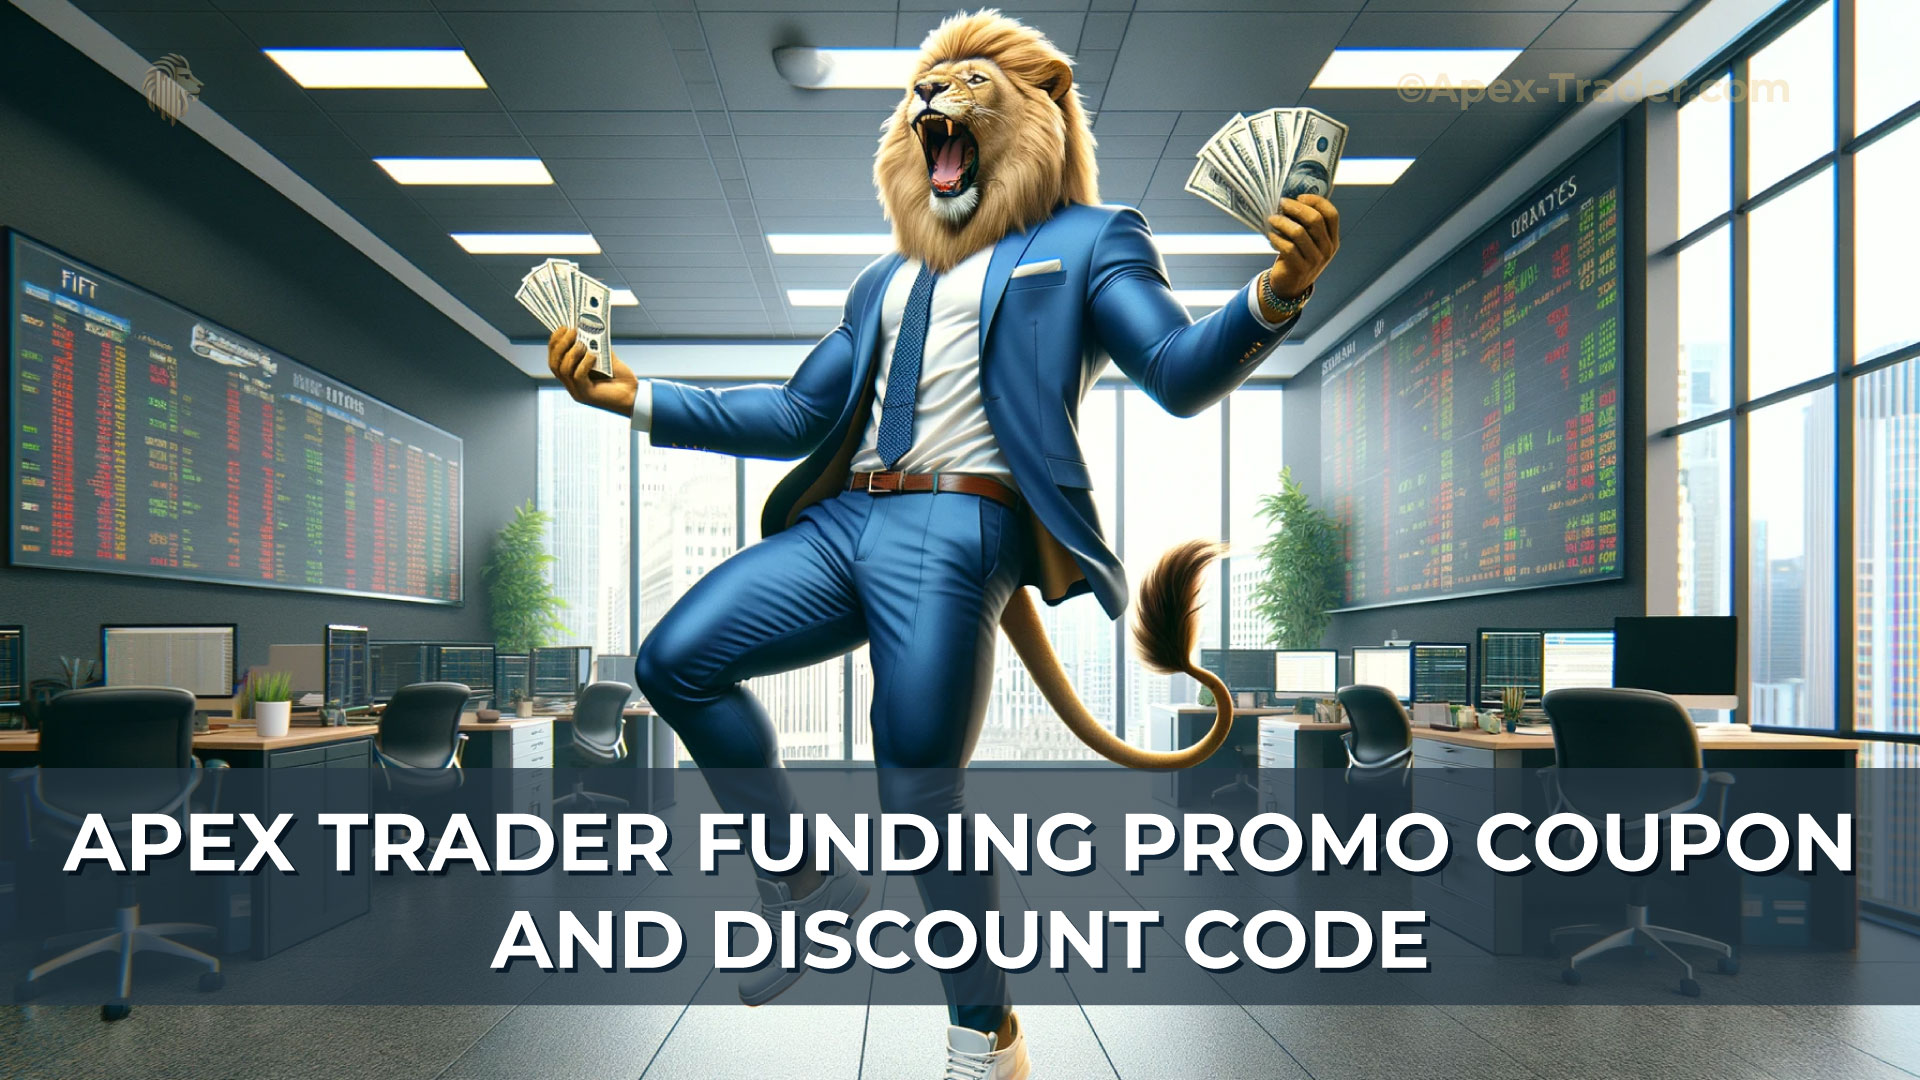 Apex-Trader-Funding-Promo-Coupon-and-Discount-Code-On-Apex-Trader-Website